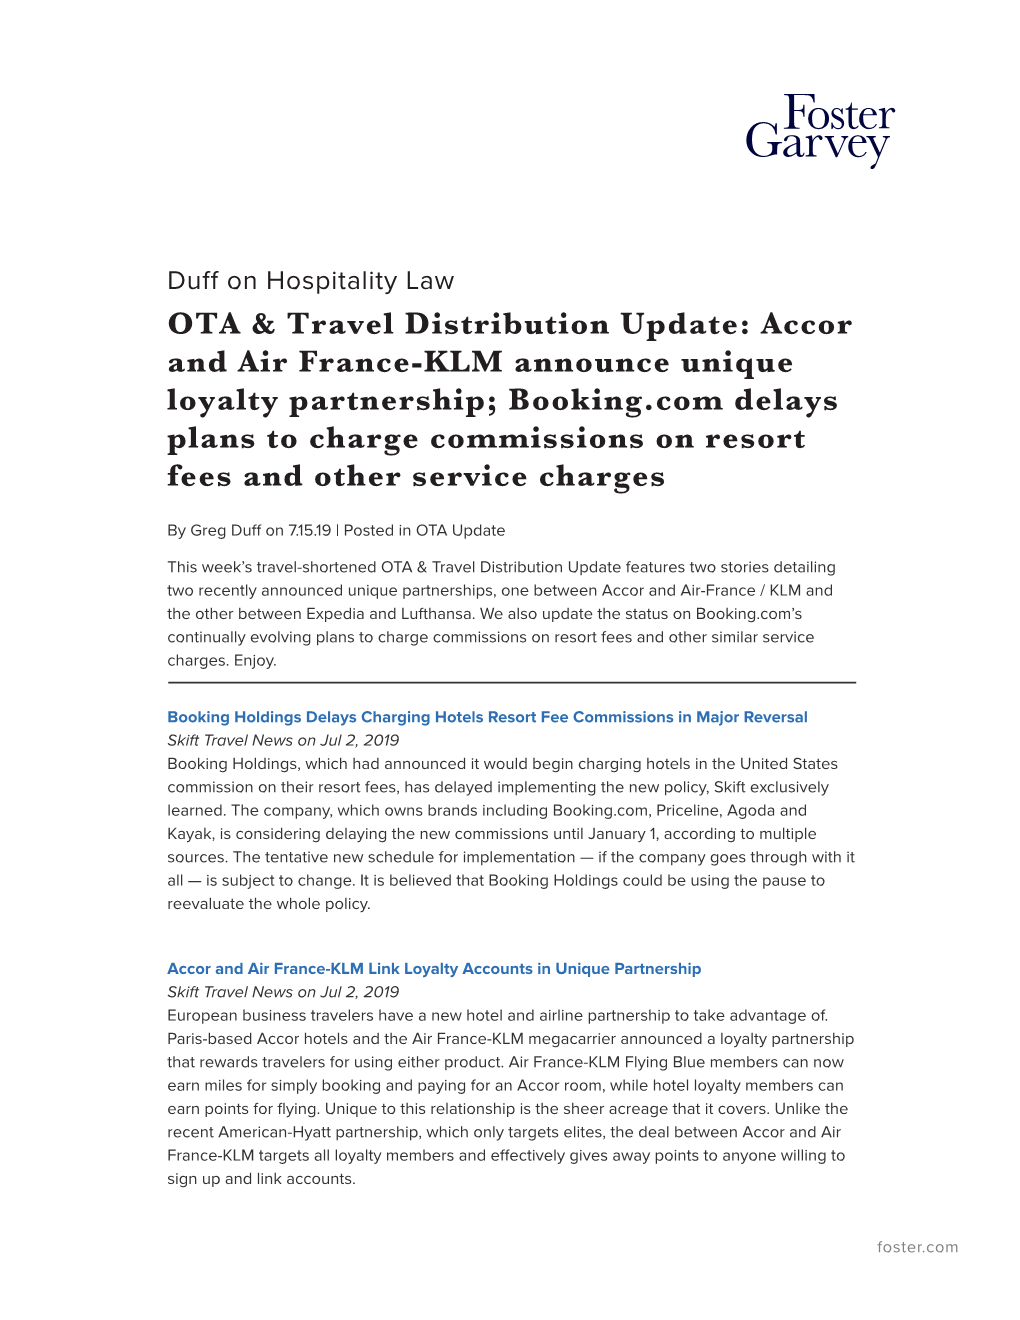 OTA & Travel Distribution Update: Accor and Air France-KLM Announce Unique Loyalty Partnership; Booking.Com Delays Plans To